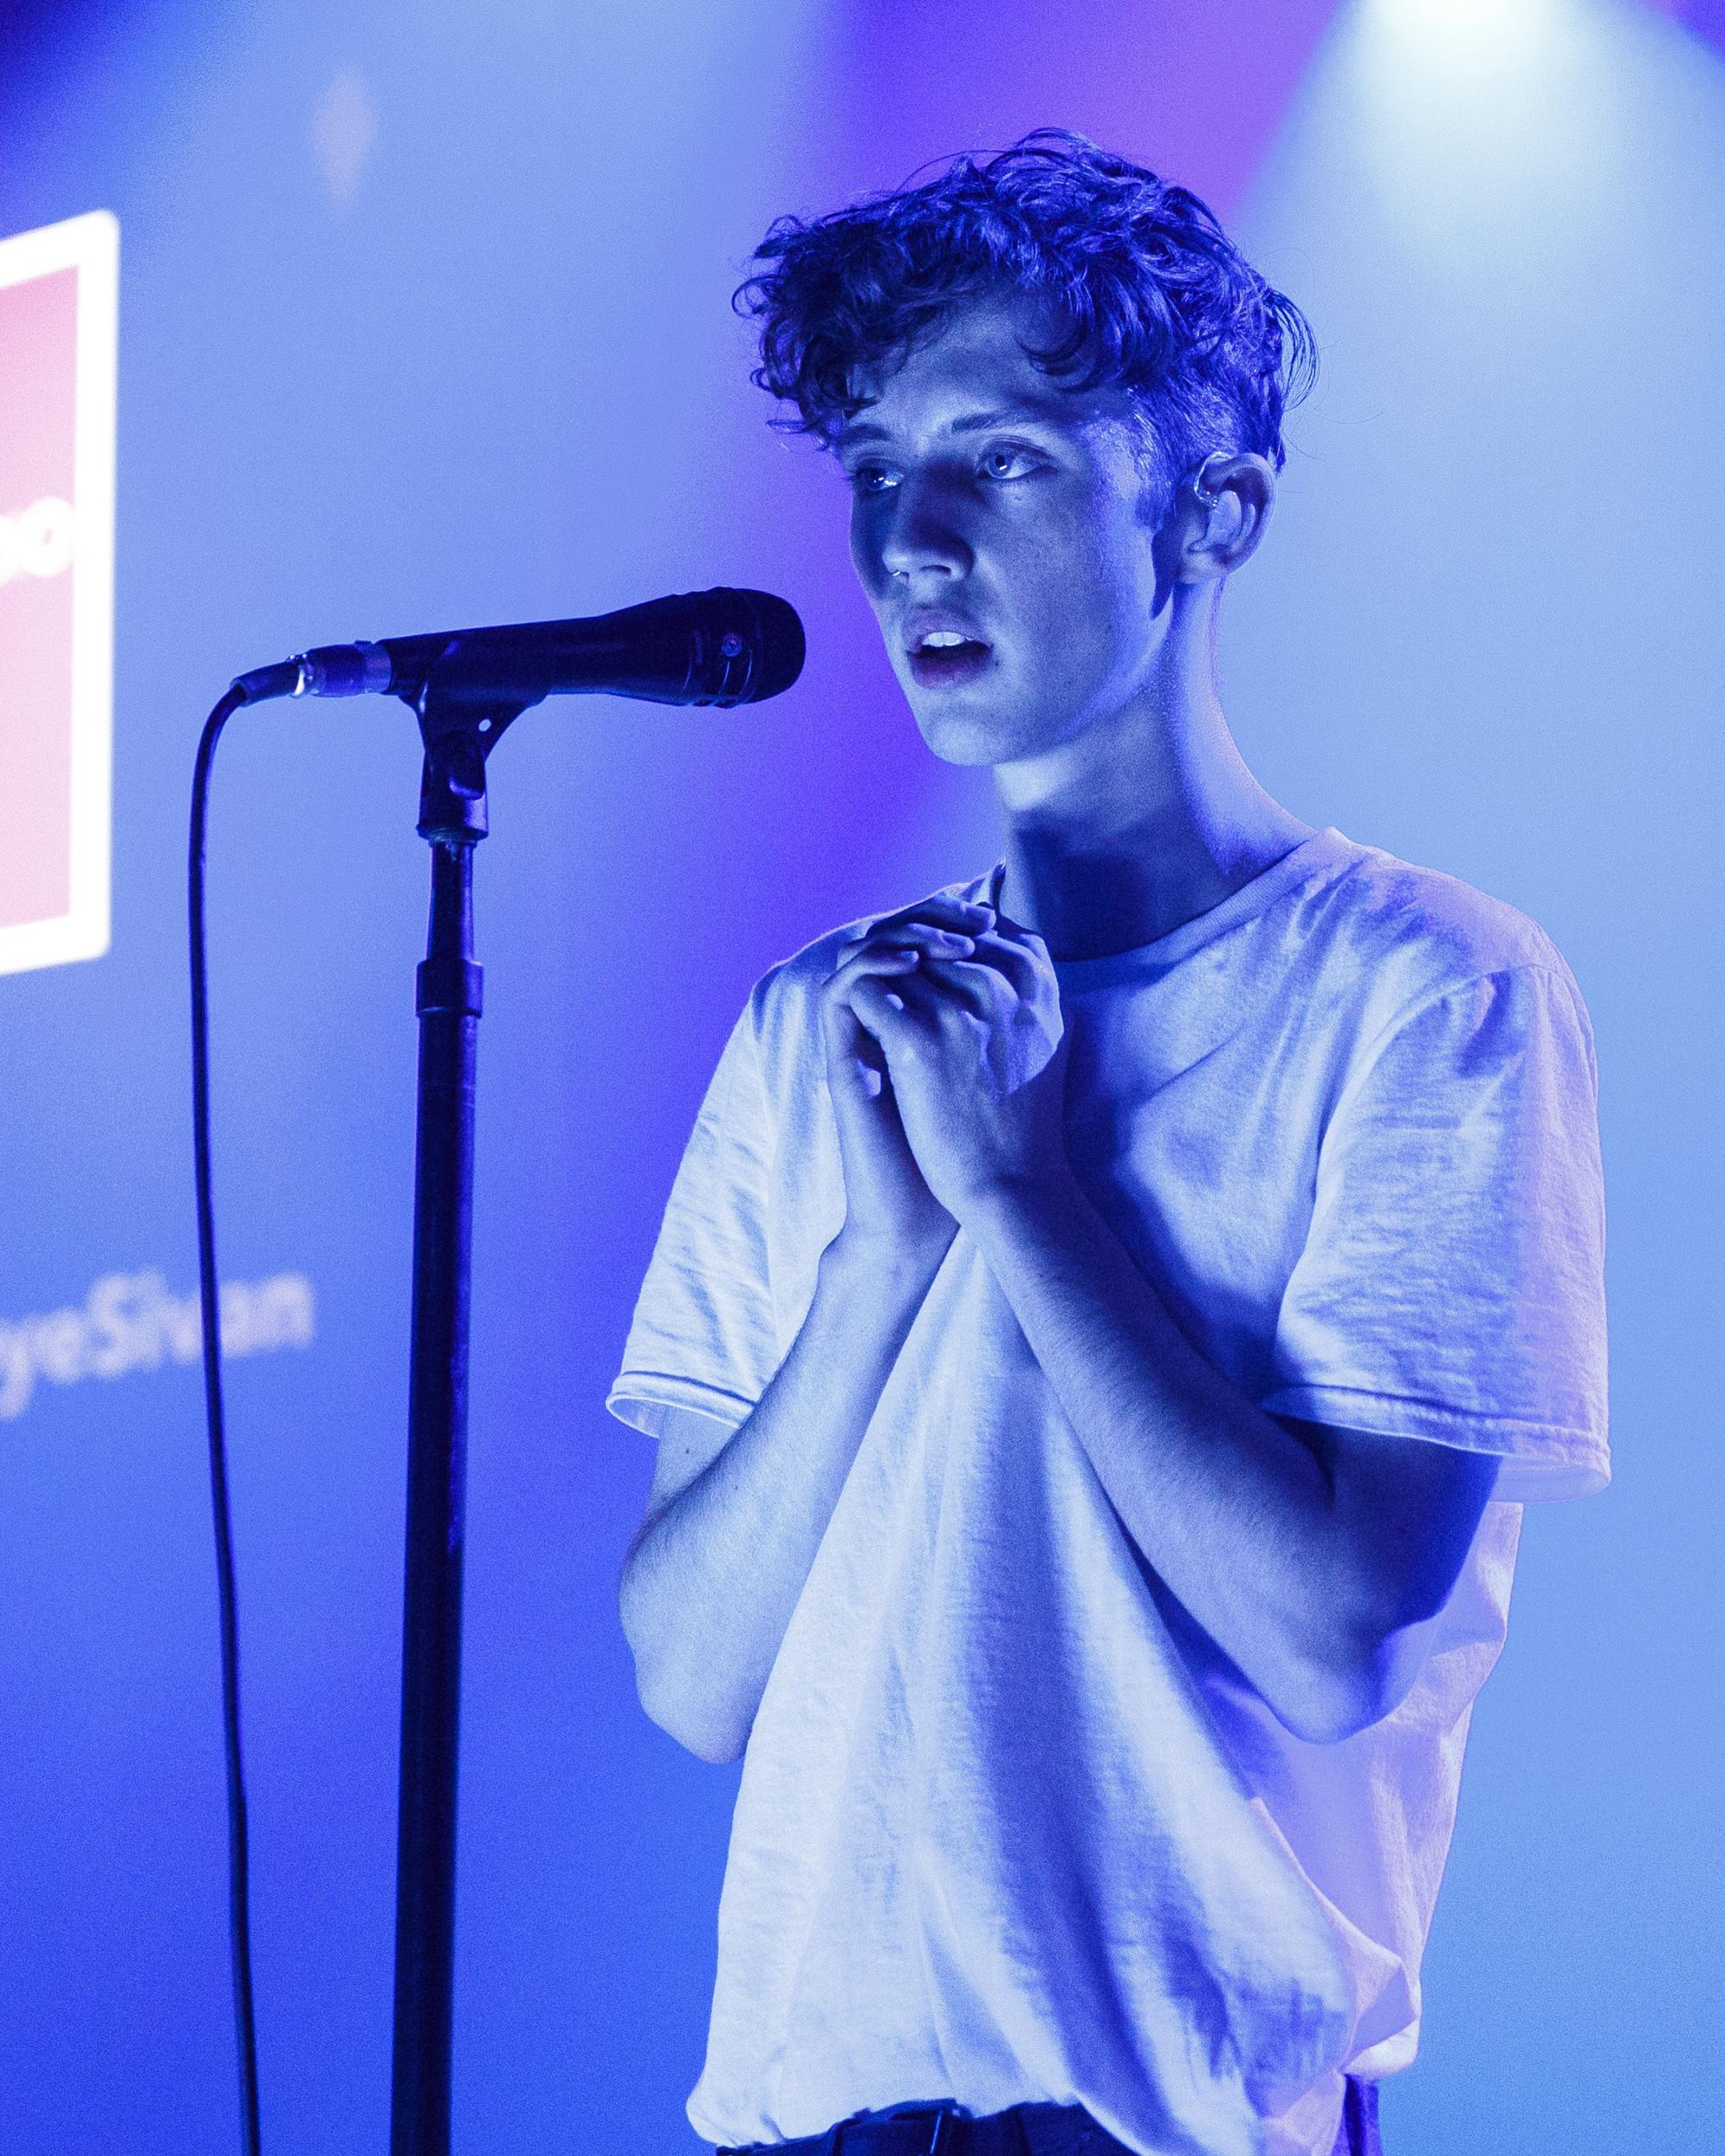 Troye Sivan Interview: Ariana Grande's aide answers Out magazine and interviewer for inappropriate questions